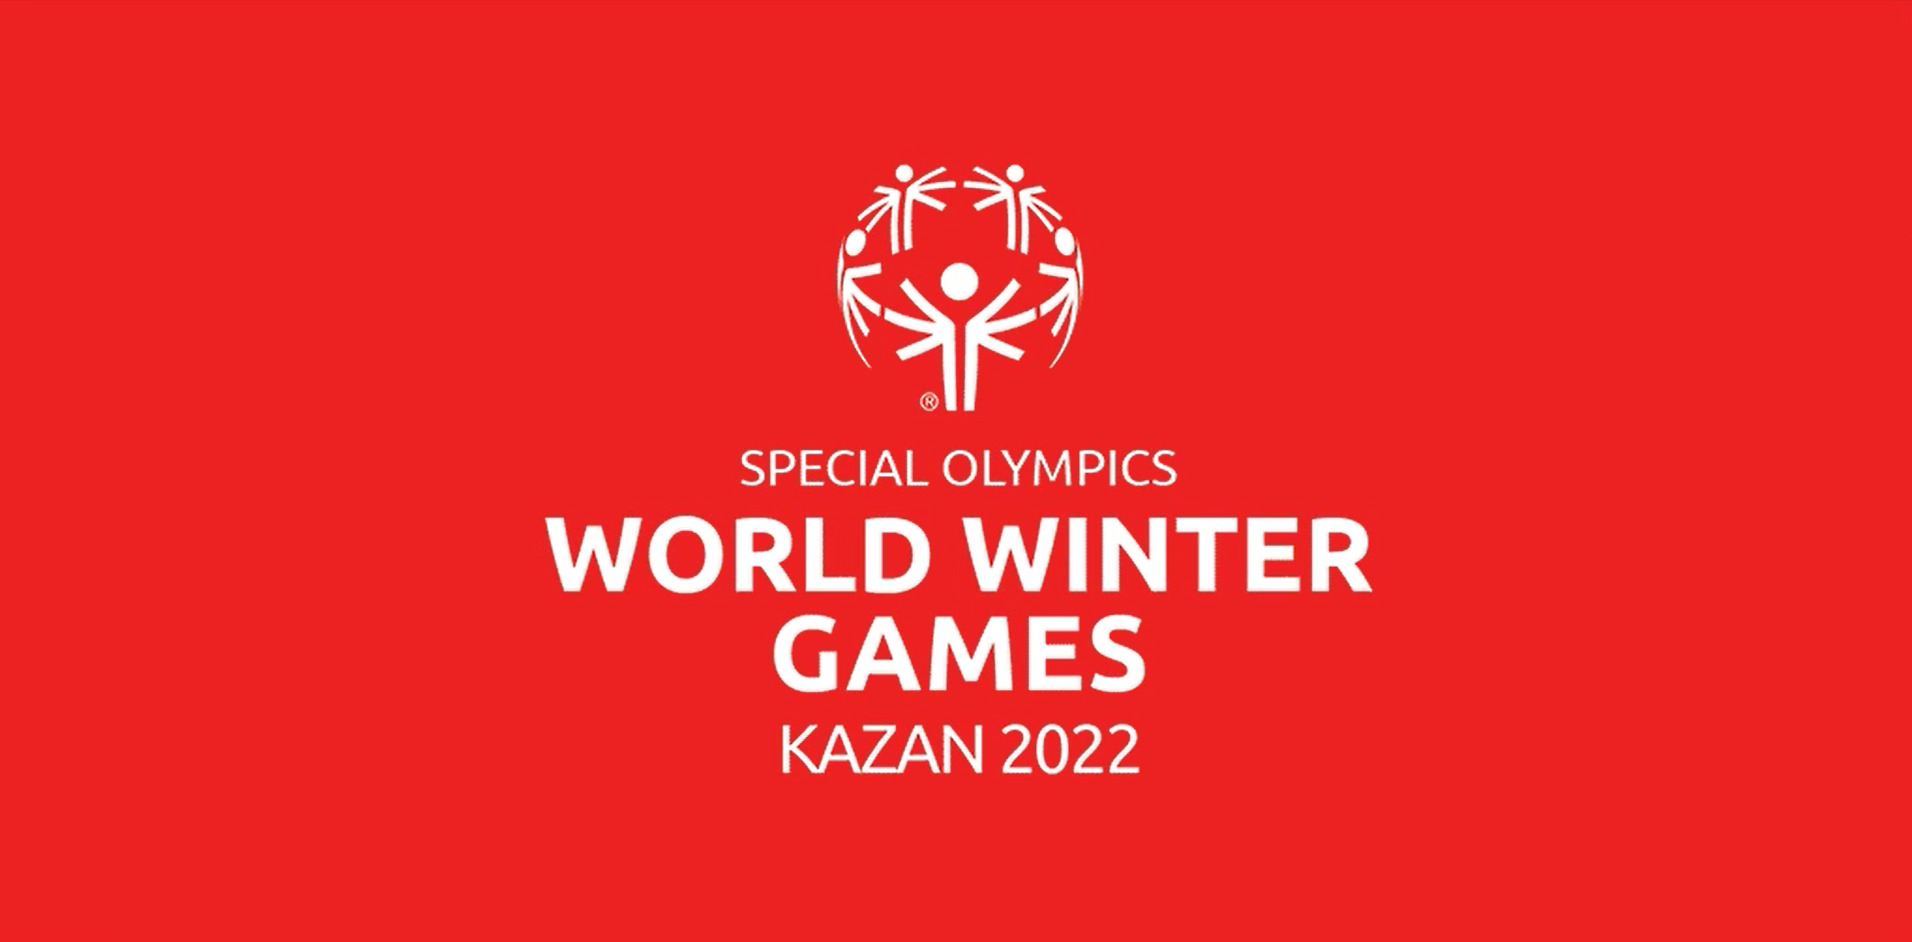 Special Olympics World Winter Games 2022 in Kazan, Rusland - Special